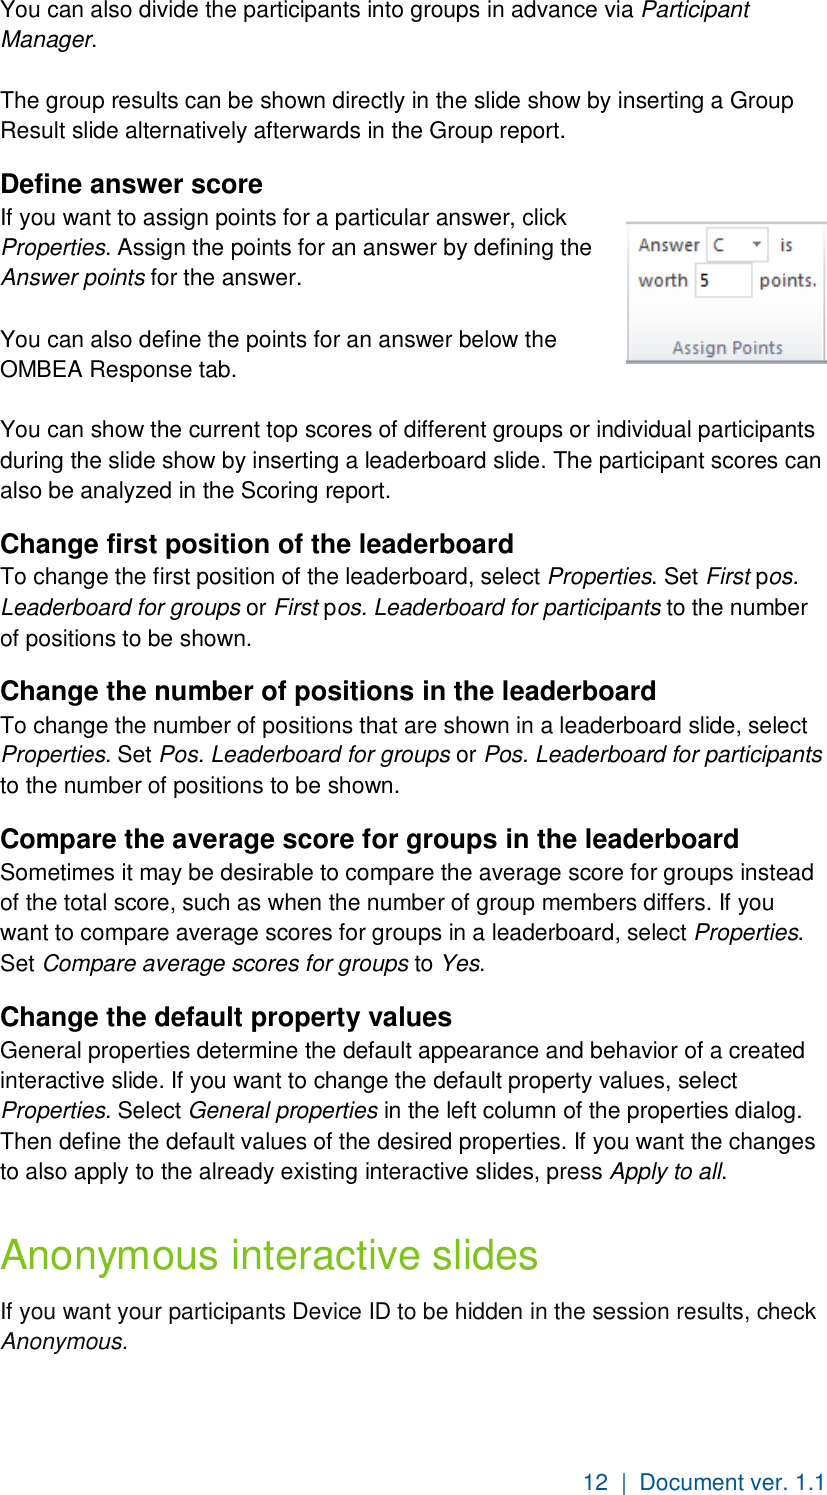 12  |  Document ver. 1.1  You can also divide the participants into groups in advance via Participant Manager.  The group results can be shown directly in the slide show by inserting a Group Result slide alternatively afterwards in the Group report. Define answer score If you want to assign points for a particular answer, click Properties. Assign the points for an answer by defining the Answer points for the answer.  You can also define the points for an answer below the OMBEA Response tab.  You can show the current top scores of different groups or individual participants during the slide show by inserting a leaderboard slide. The participant scores can also be analyzed in the Scoring report.  Change first position of the leaderboard To change the first position of the leaderboard, select Properties. Set First pos. Leaderboard for groups or First pos. Leaderboard for participants to the number of positions to be shown. Change the number of positions in the leaderboard  To change the number of positions that are shown in a leaderboard slide, select Properties. Set Pos. Leaderboard for groups or Pos. Leaderboard for participants to the number of positions to be shown. Compare the average score for groups in the leaderboard  Sometimes it may be desirable to compare the average score for groups instead of the total score, such as when the number of group members differs. If you want to compare average scores for groups in a leaderboard, select Properties. Set Compare average scores for groups to Yes. Change the default property values General properties determine the default appearance and behavior of a created interactive slide. If you want to change the default property values, select Properties. Select General properties in the left column of the properties dialog. Then define the default values of the desired properties. If you want the changes to also apply to the already existing interactive slides, press Apply to all. Anonymous interactive slides If you want your participants Device ID to be hidden in the session results, check Anonymous. 